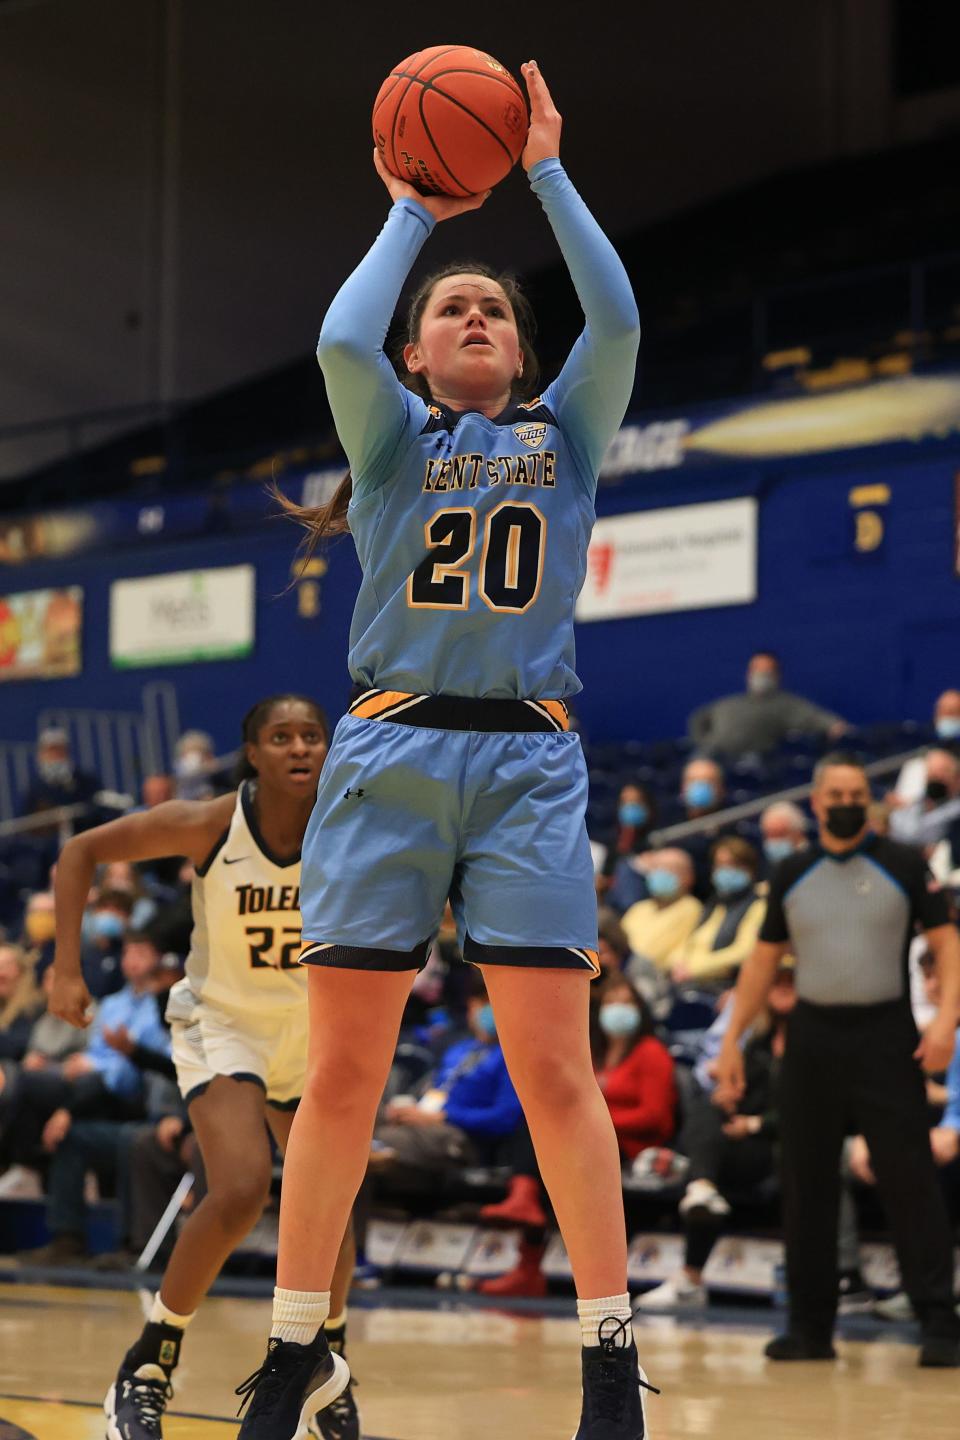 Kent State junior guard Clare Kelly scored a game-high 17 points in Saturday's loss at Western Michigan.